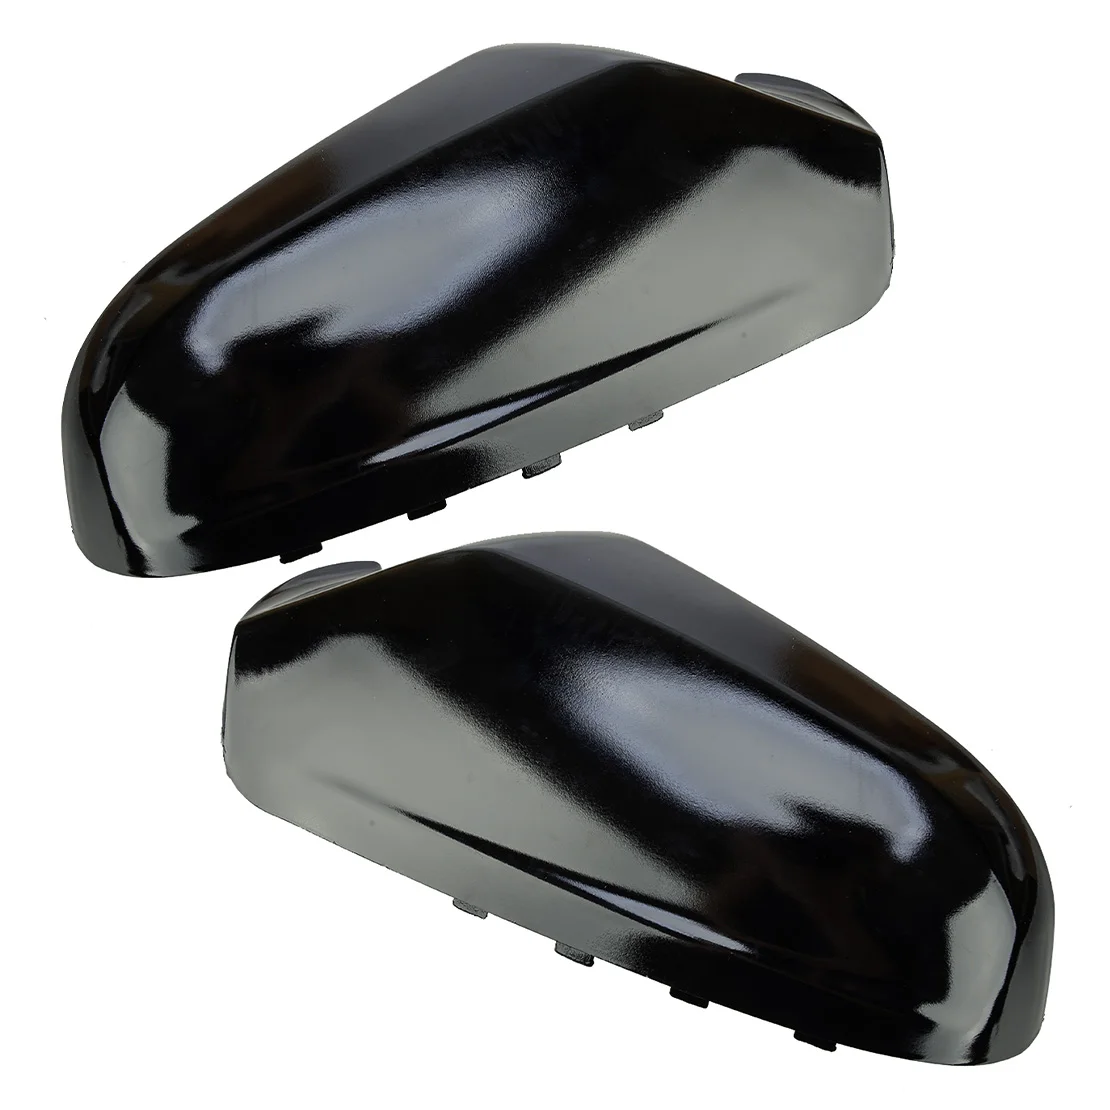 

6428925 6428199 6428918 Left & Right Rearview Mirror Cover Cap Casing 6428200 6428917 Fit For Opel Vauxhall Saturn Astra